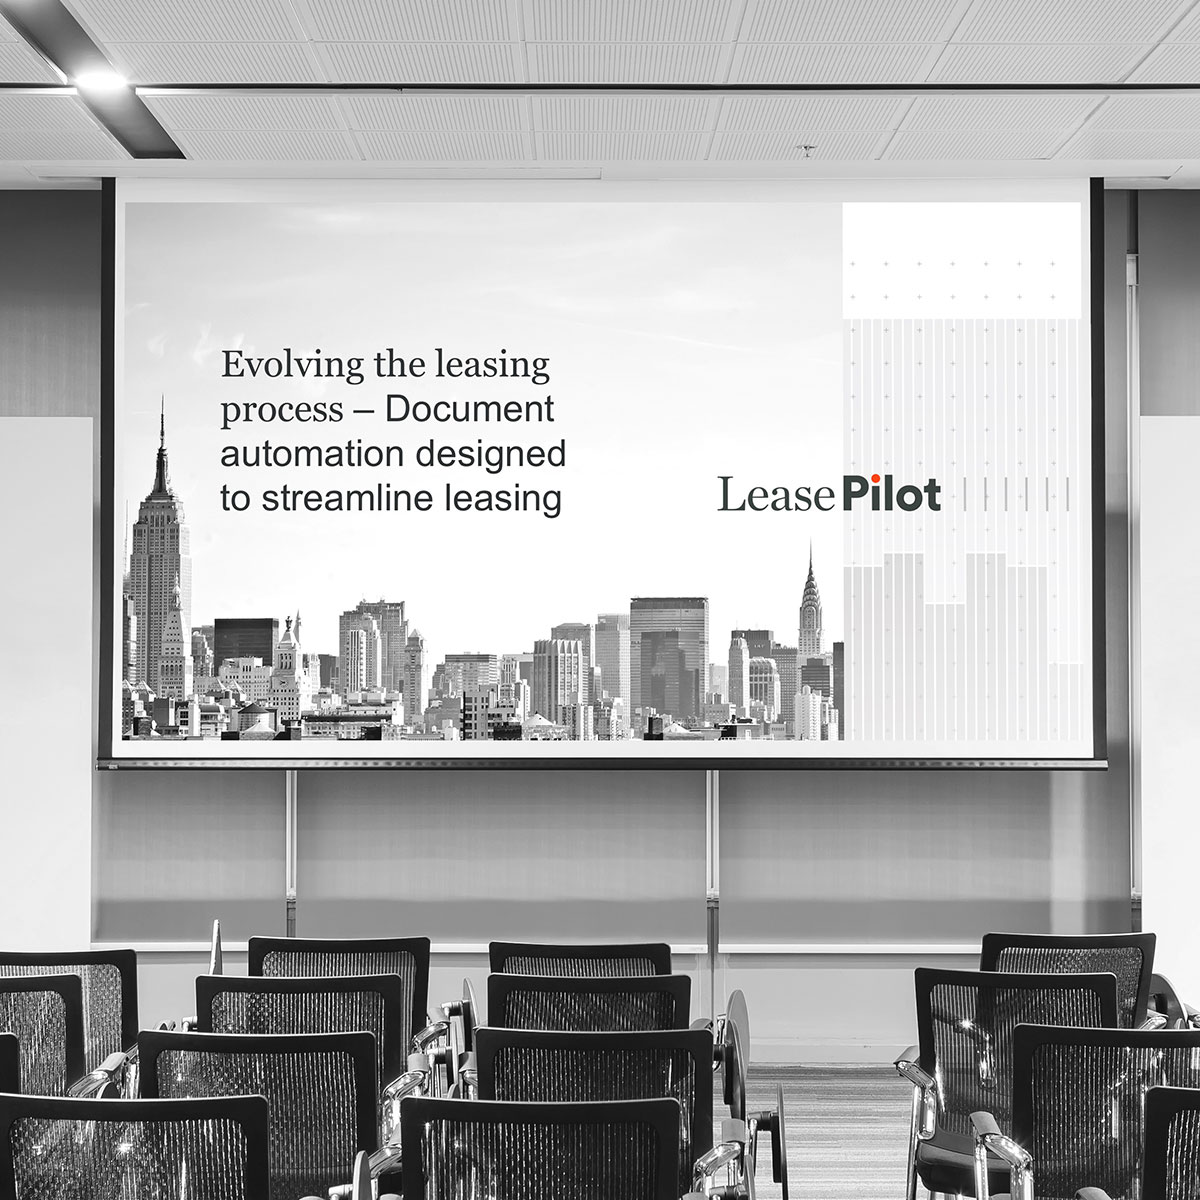 LeasePilot Brand Identity – Powerpoint Pitch Deck Cover Slide on Projector Screen in Conference Room